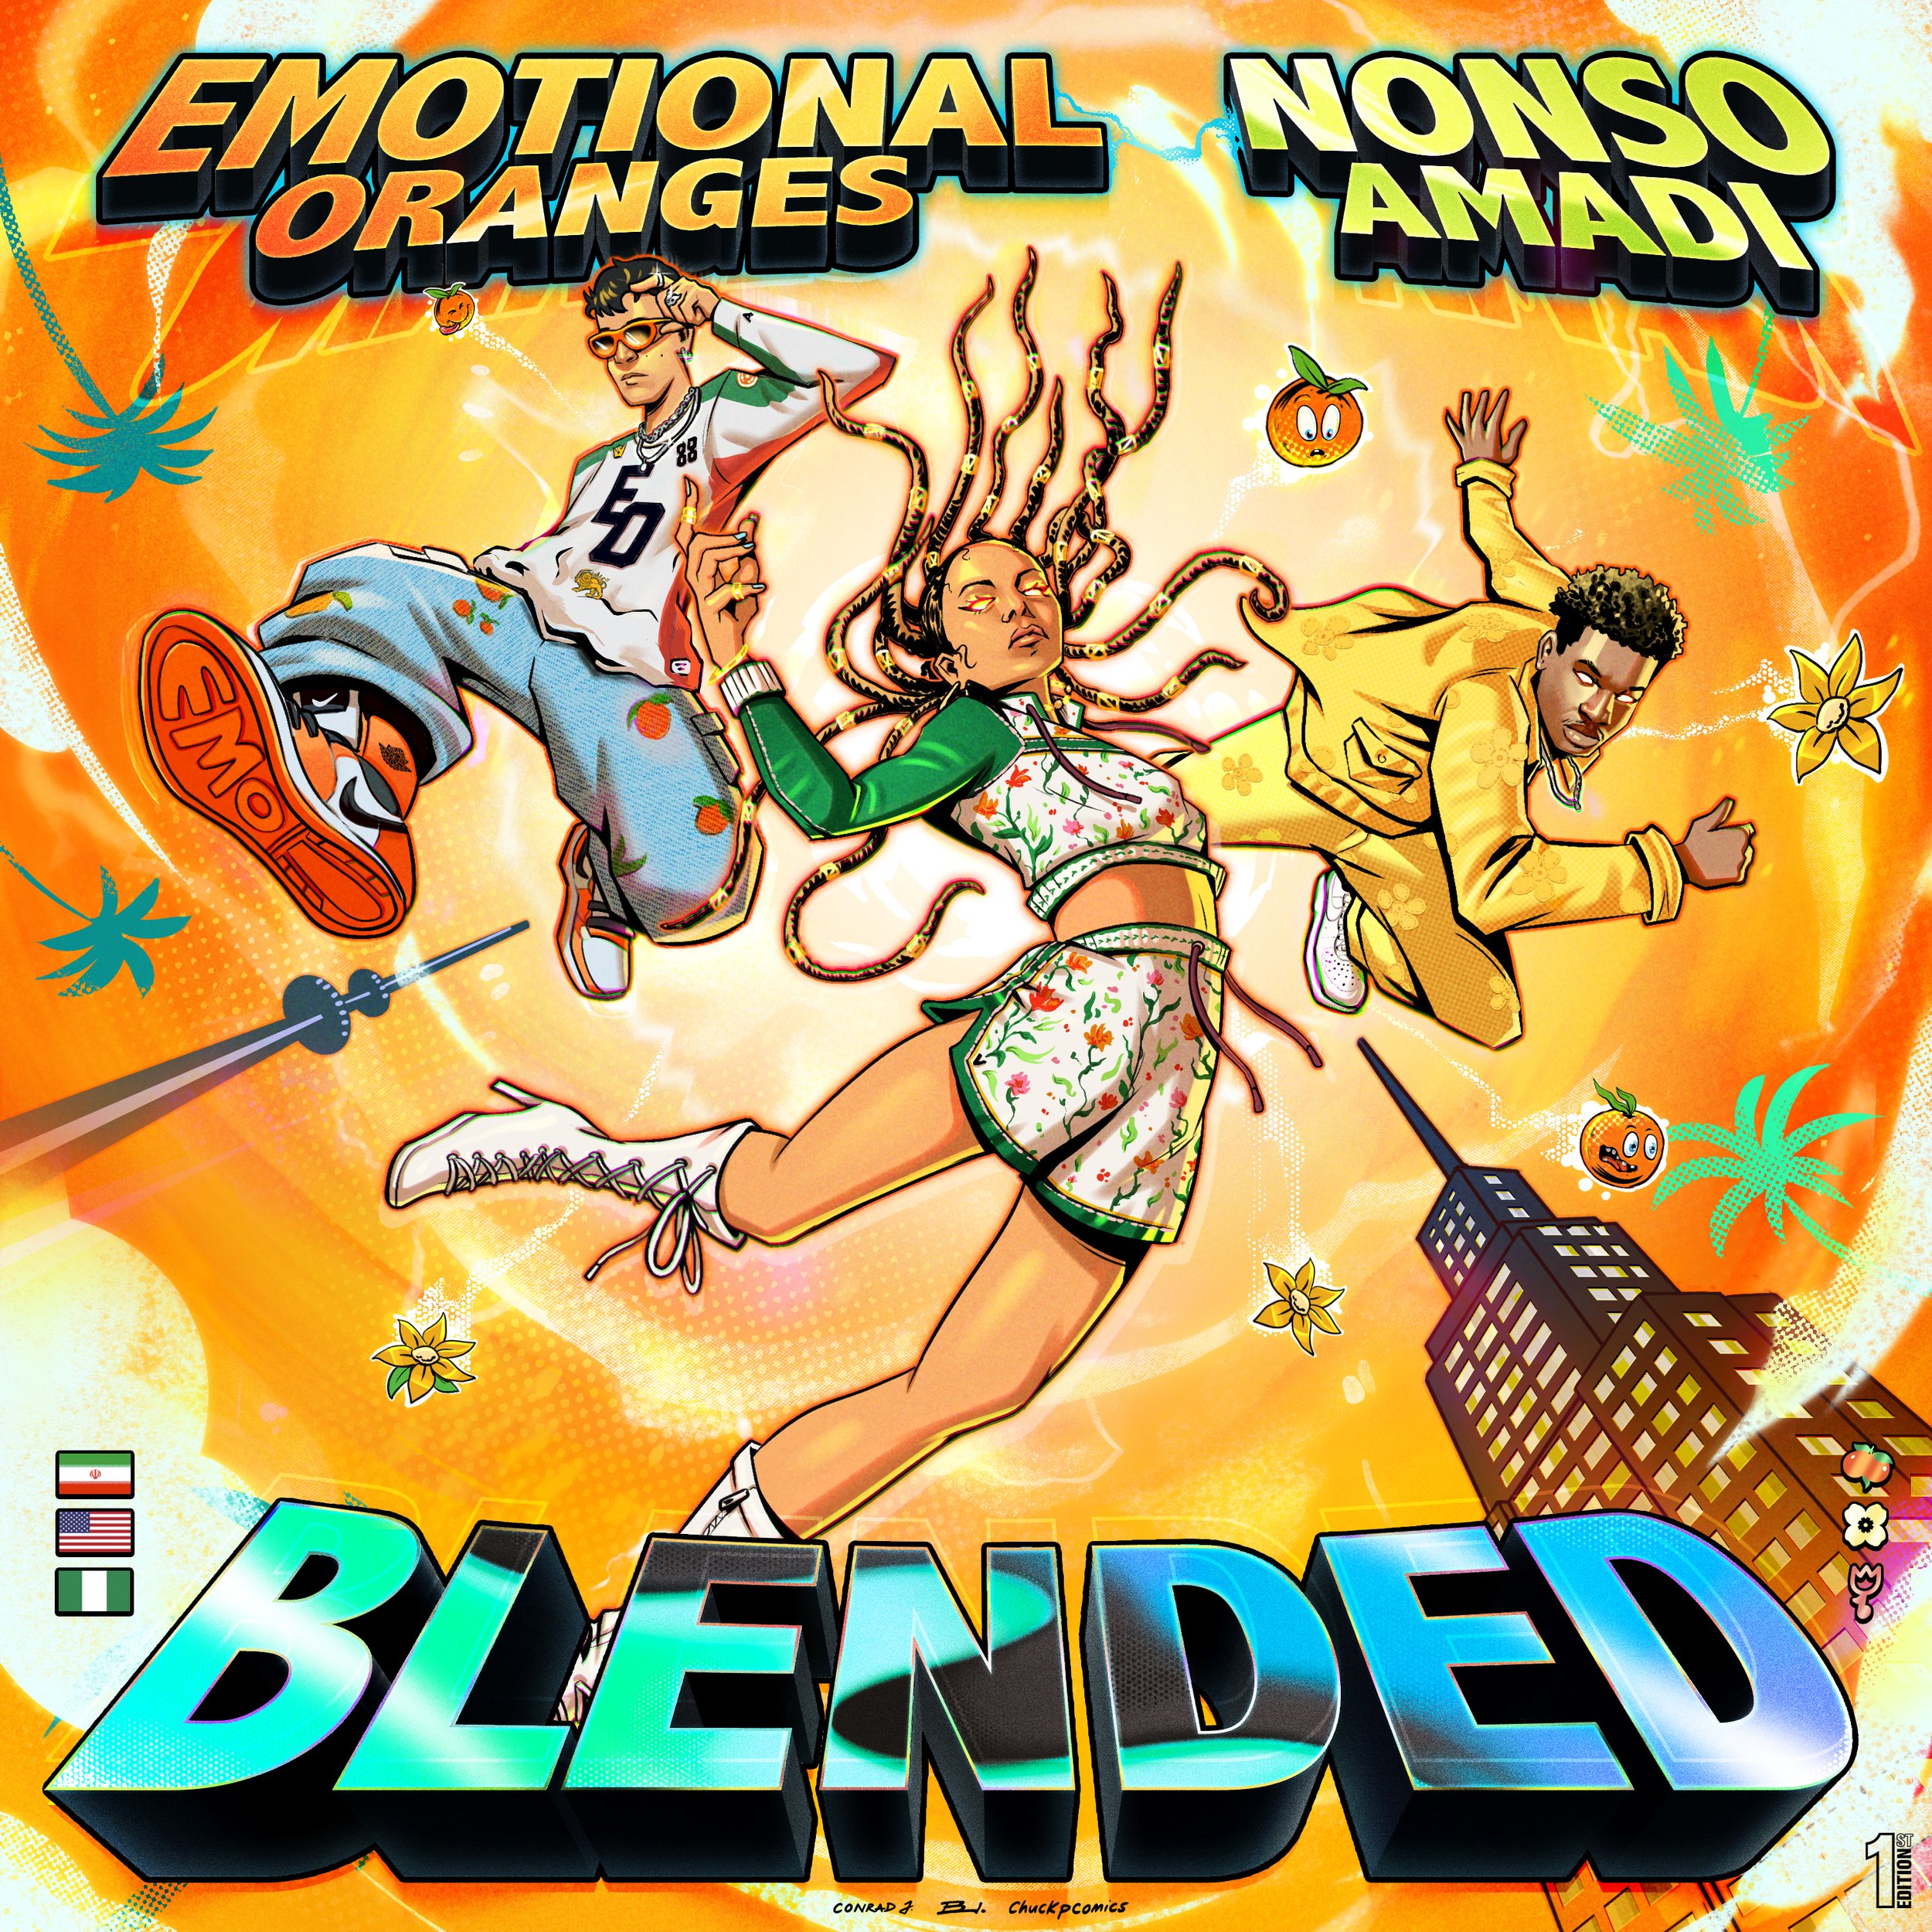 Blended by Emotional Oranges x Nonso Amadi